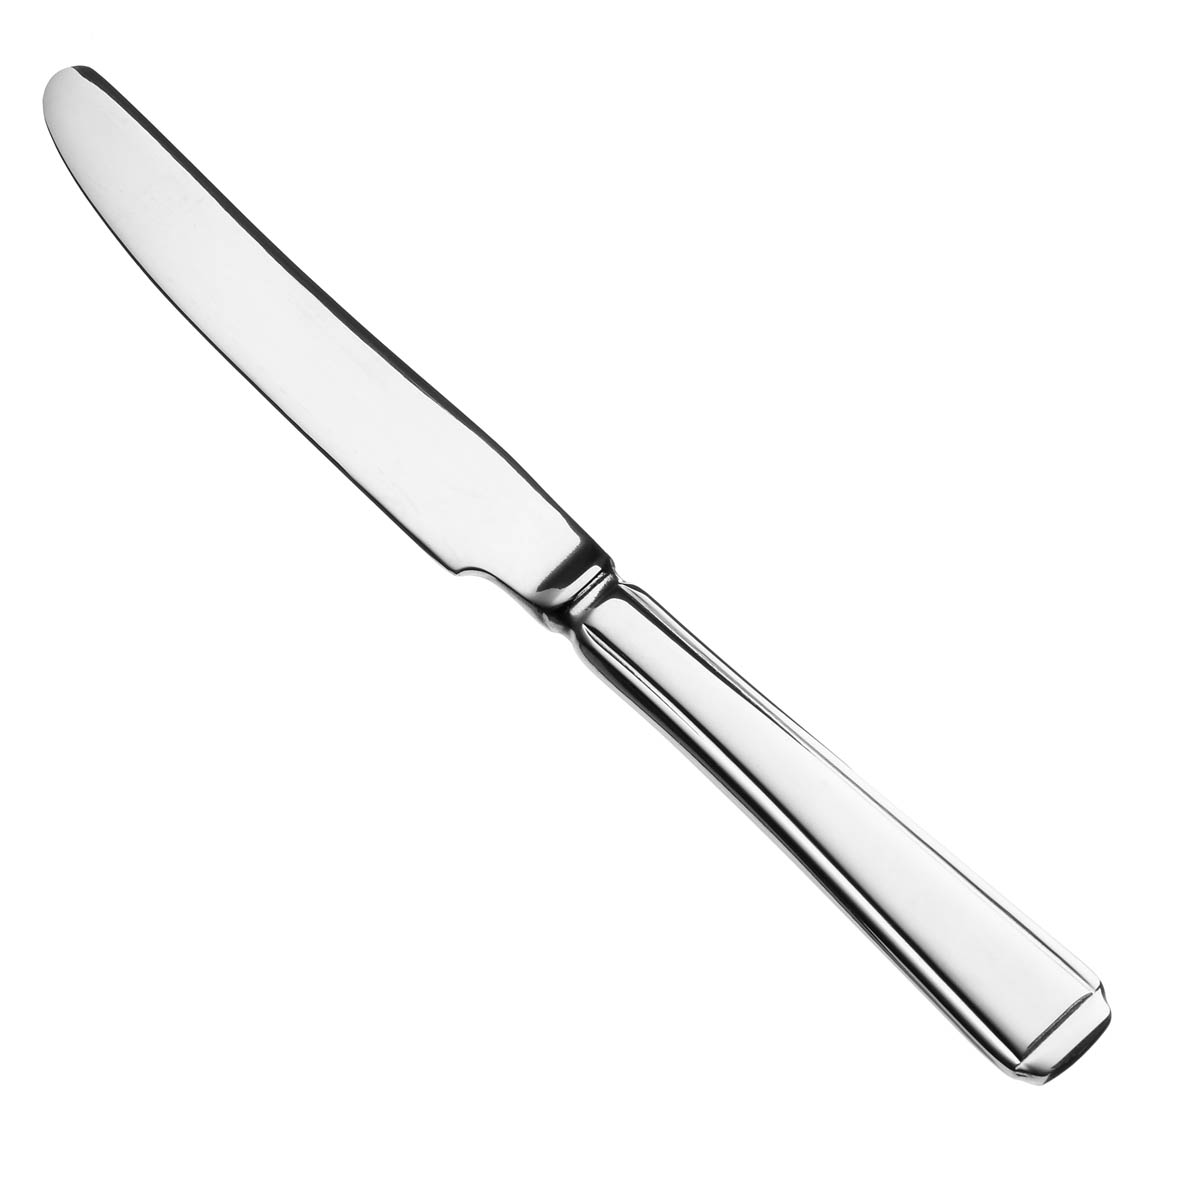 clipart of knife - photo #43